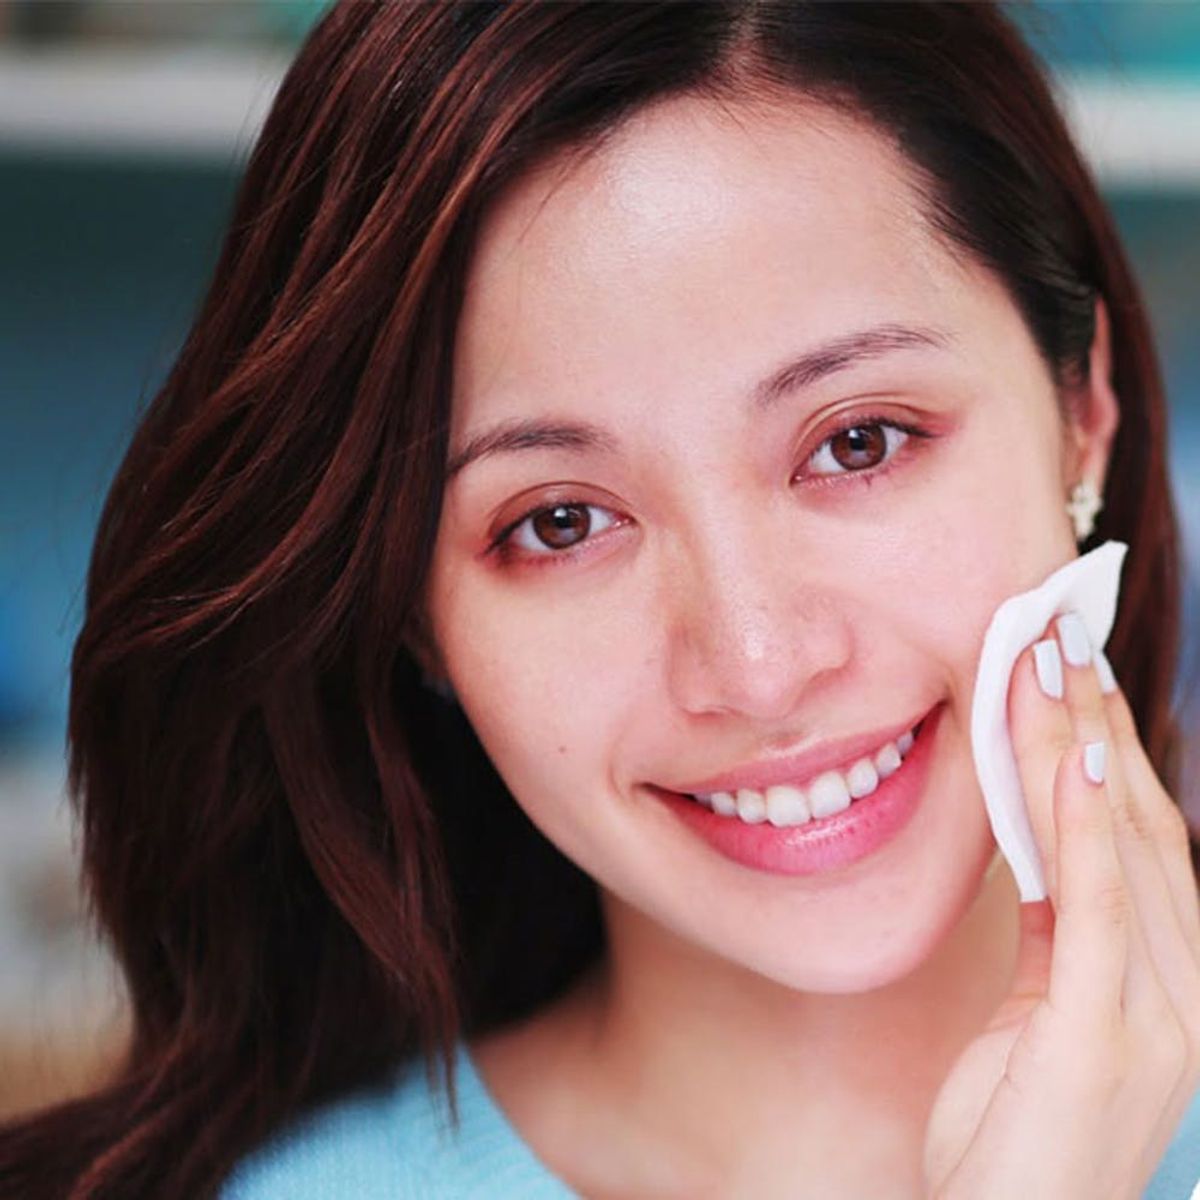 WATCH: Which Skincare Routine Is Right for You?